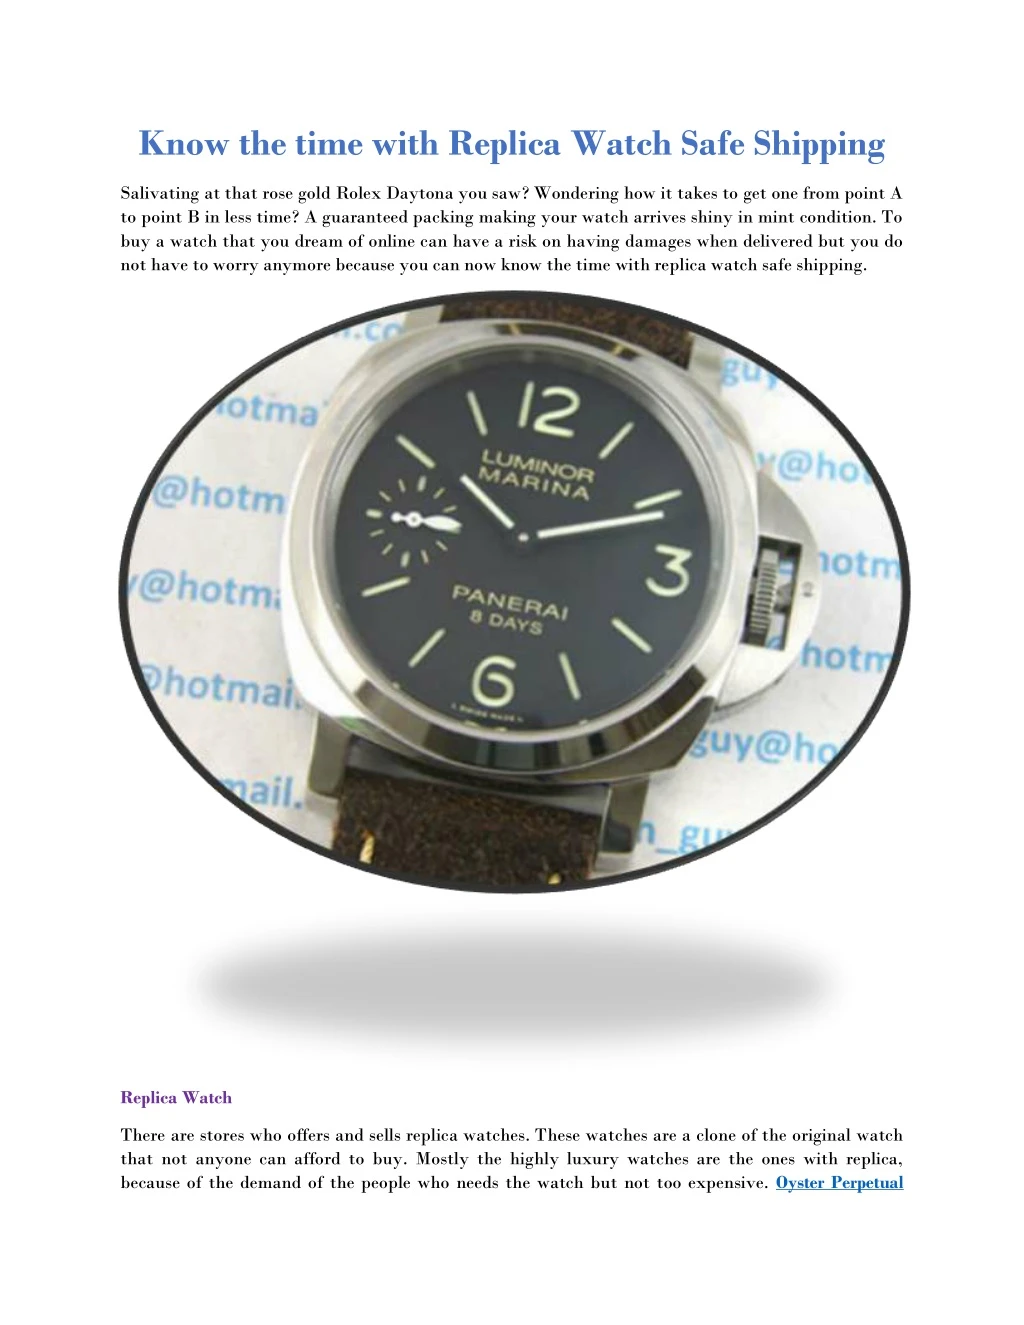 know the time with replica watch safe shipping